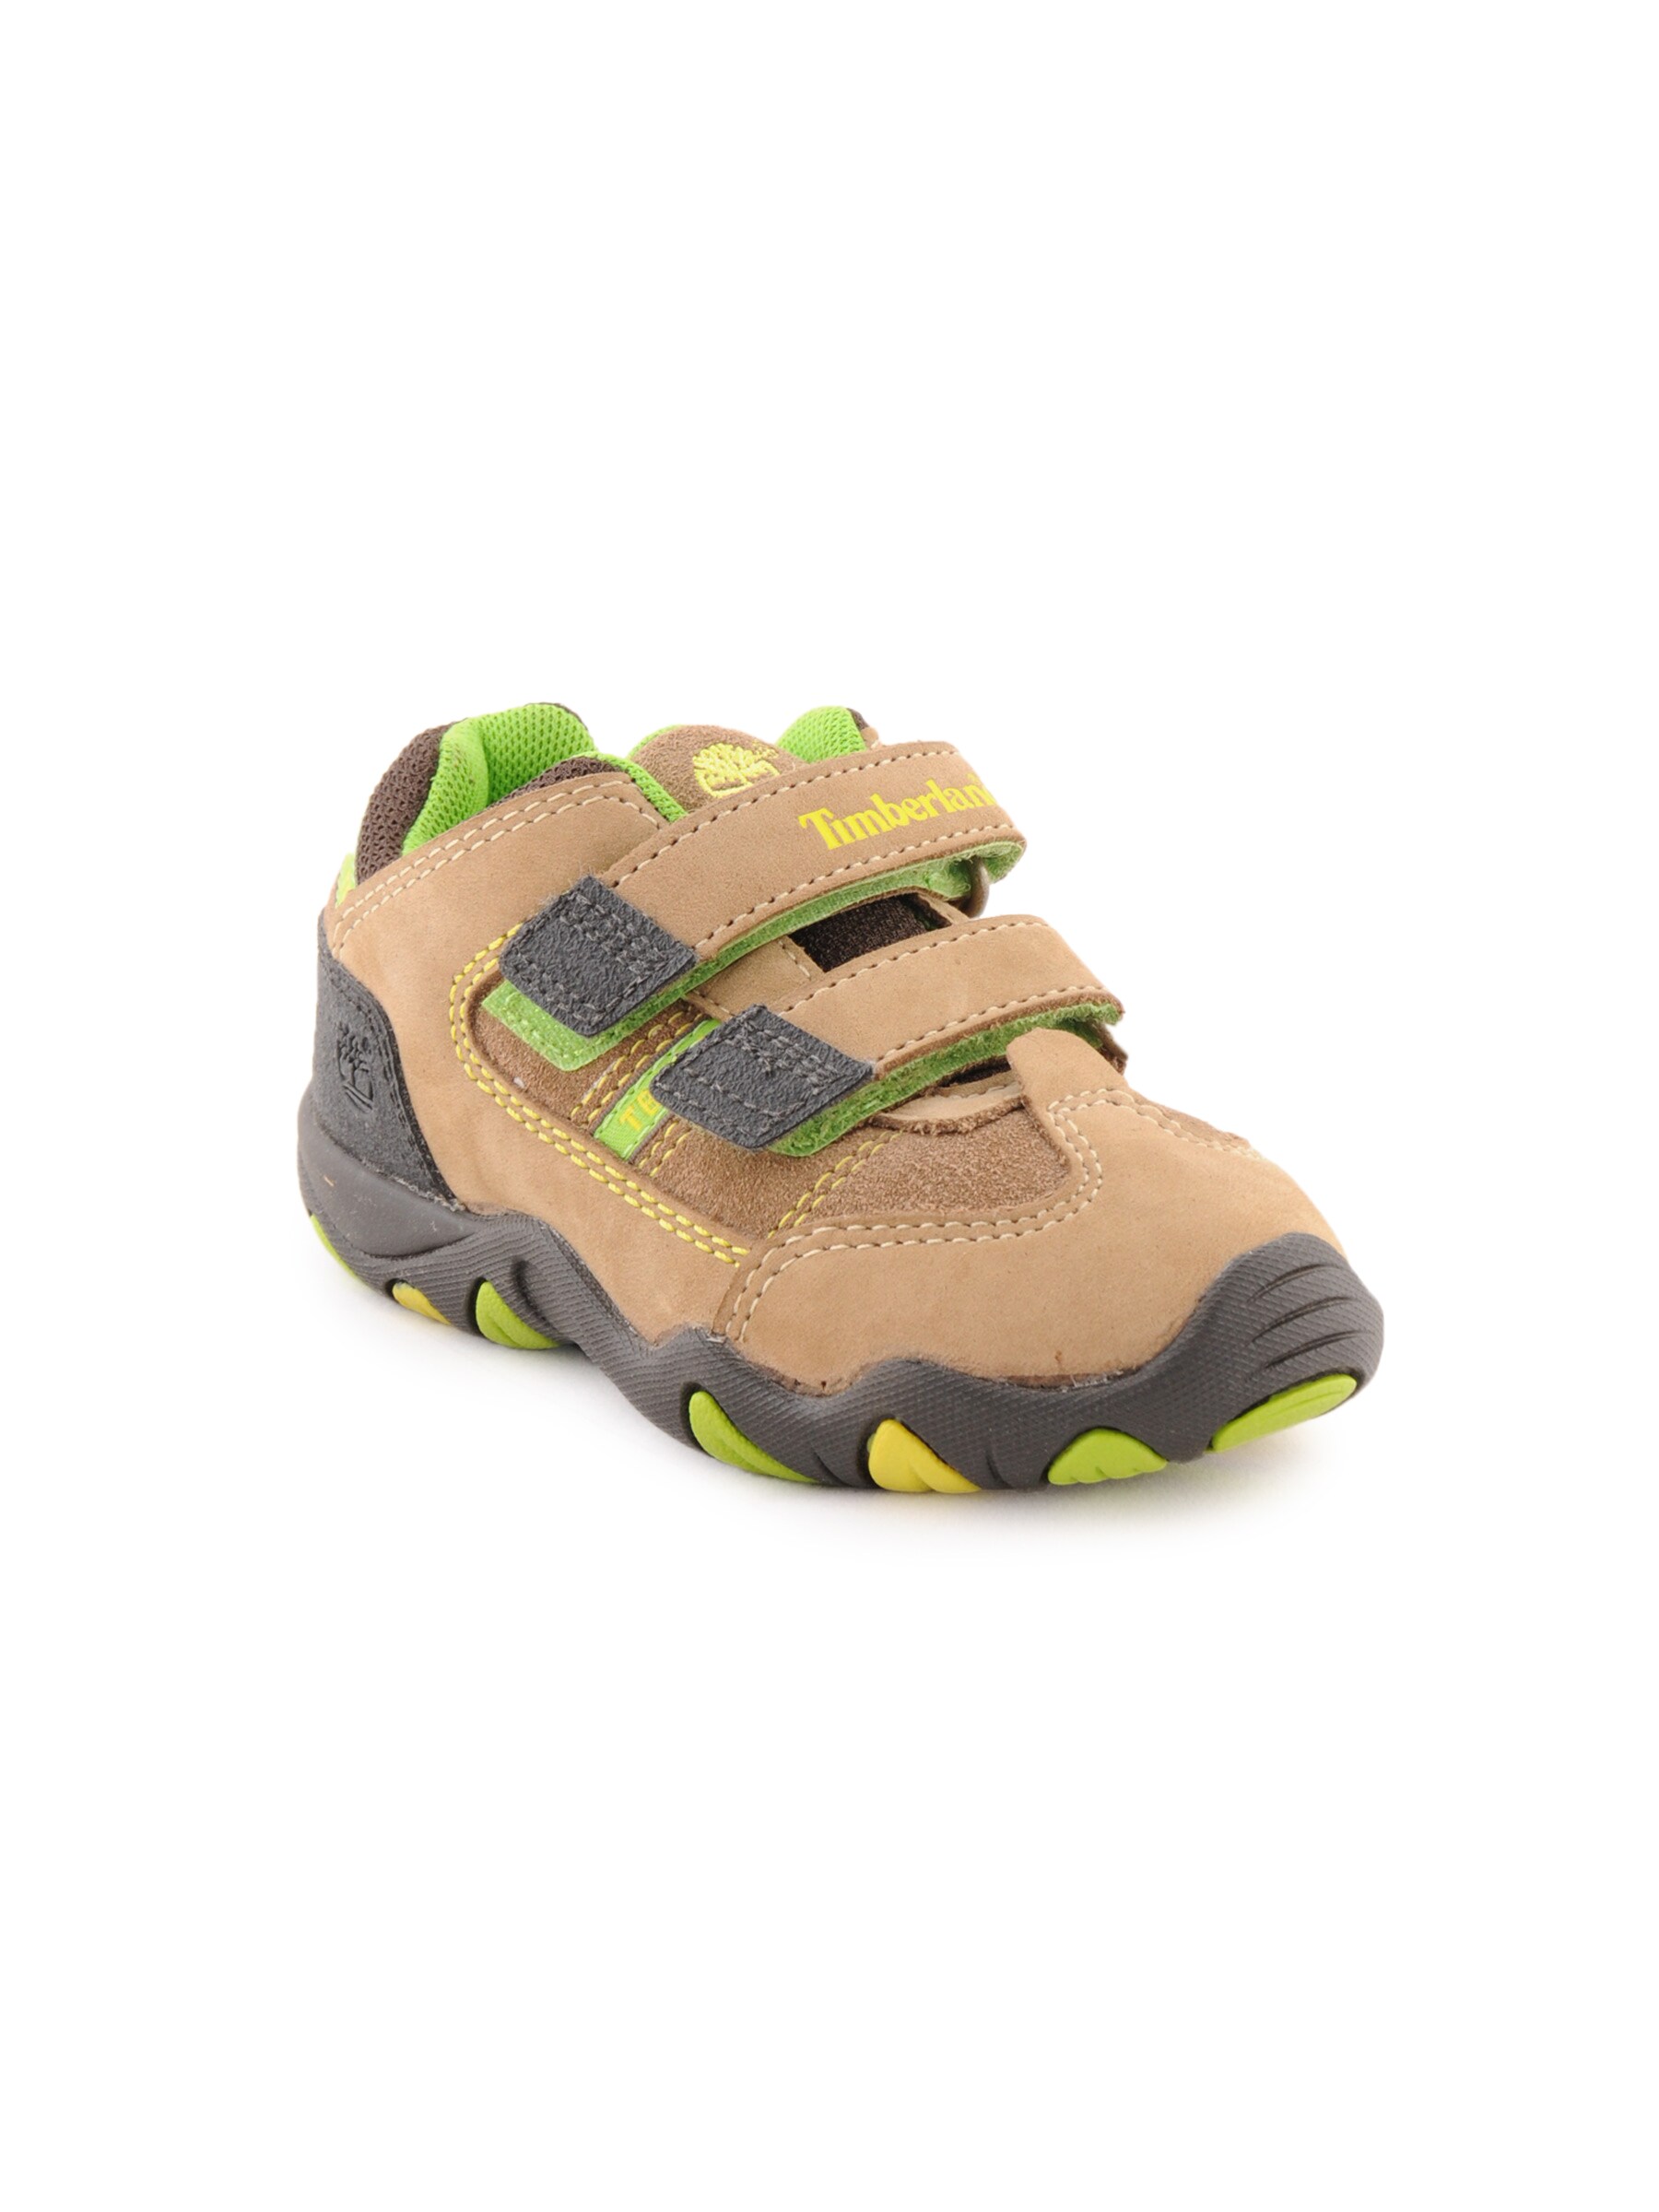 Timberland Men Toddler Brown Casual Shoes